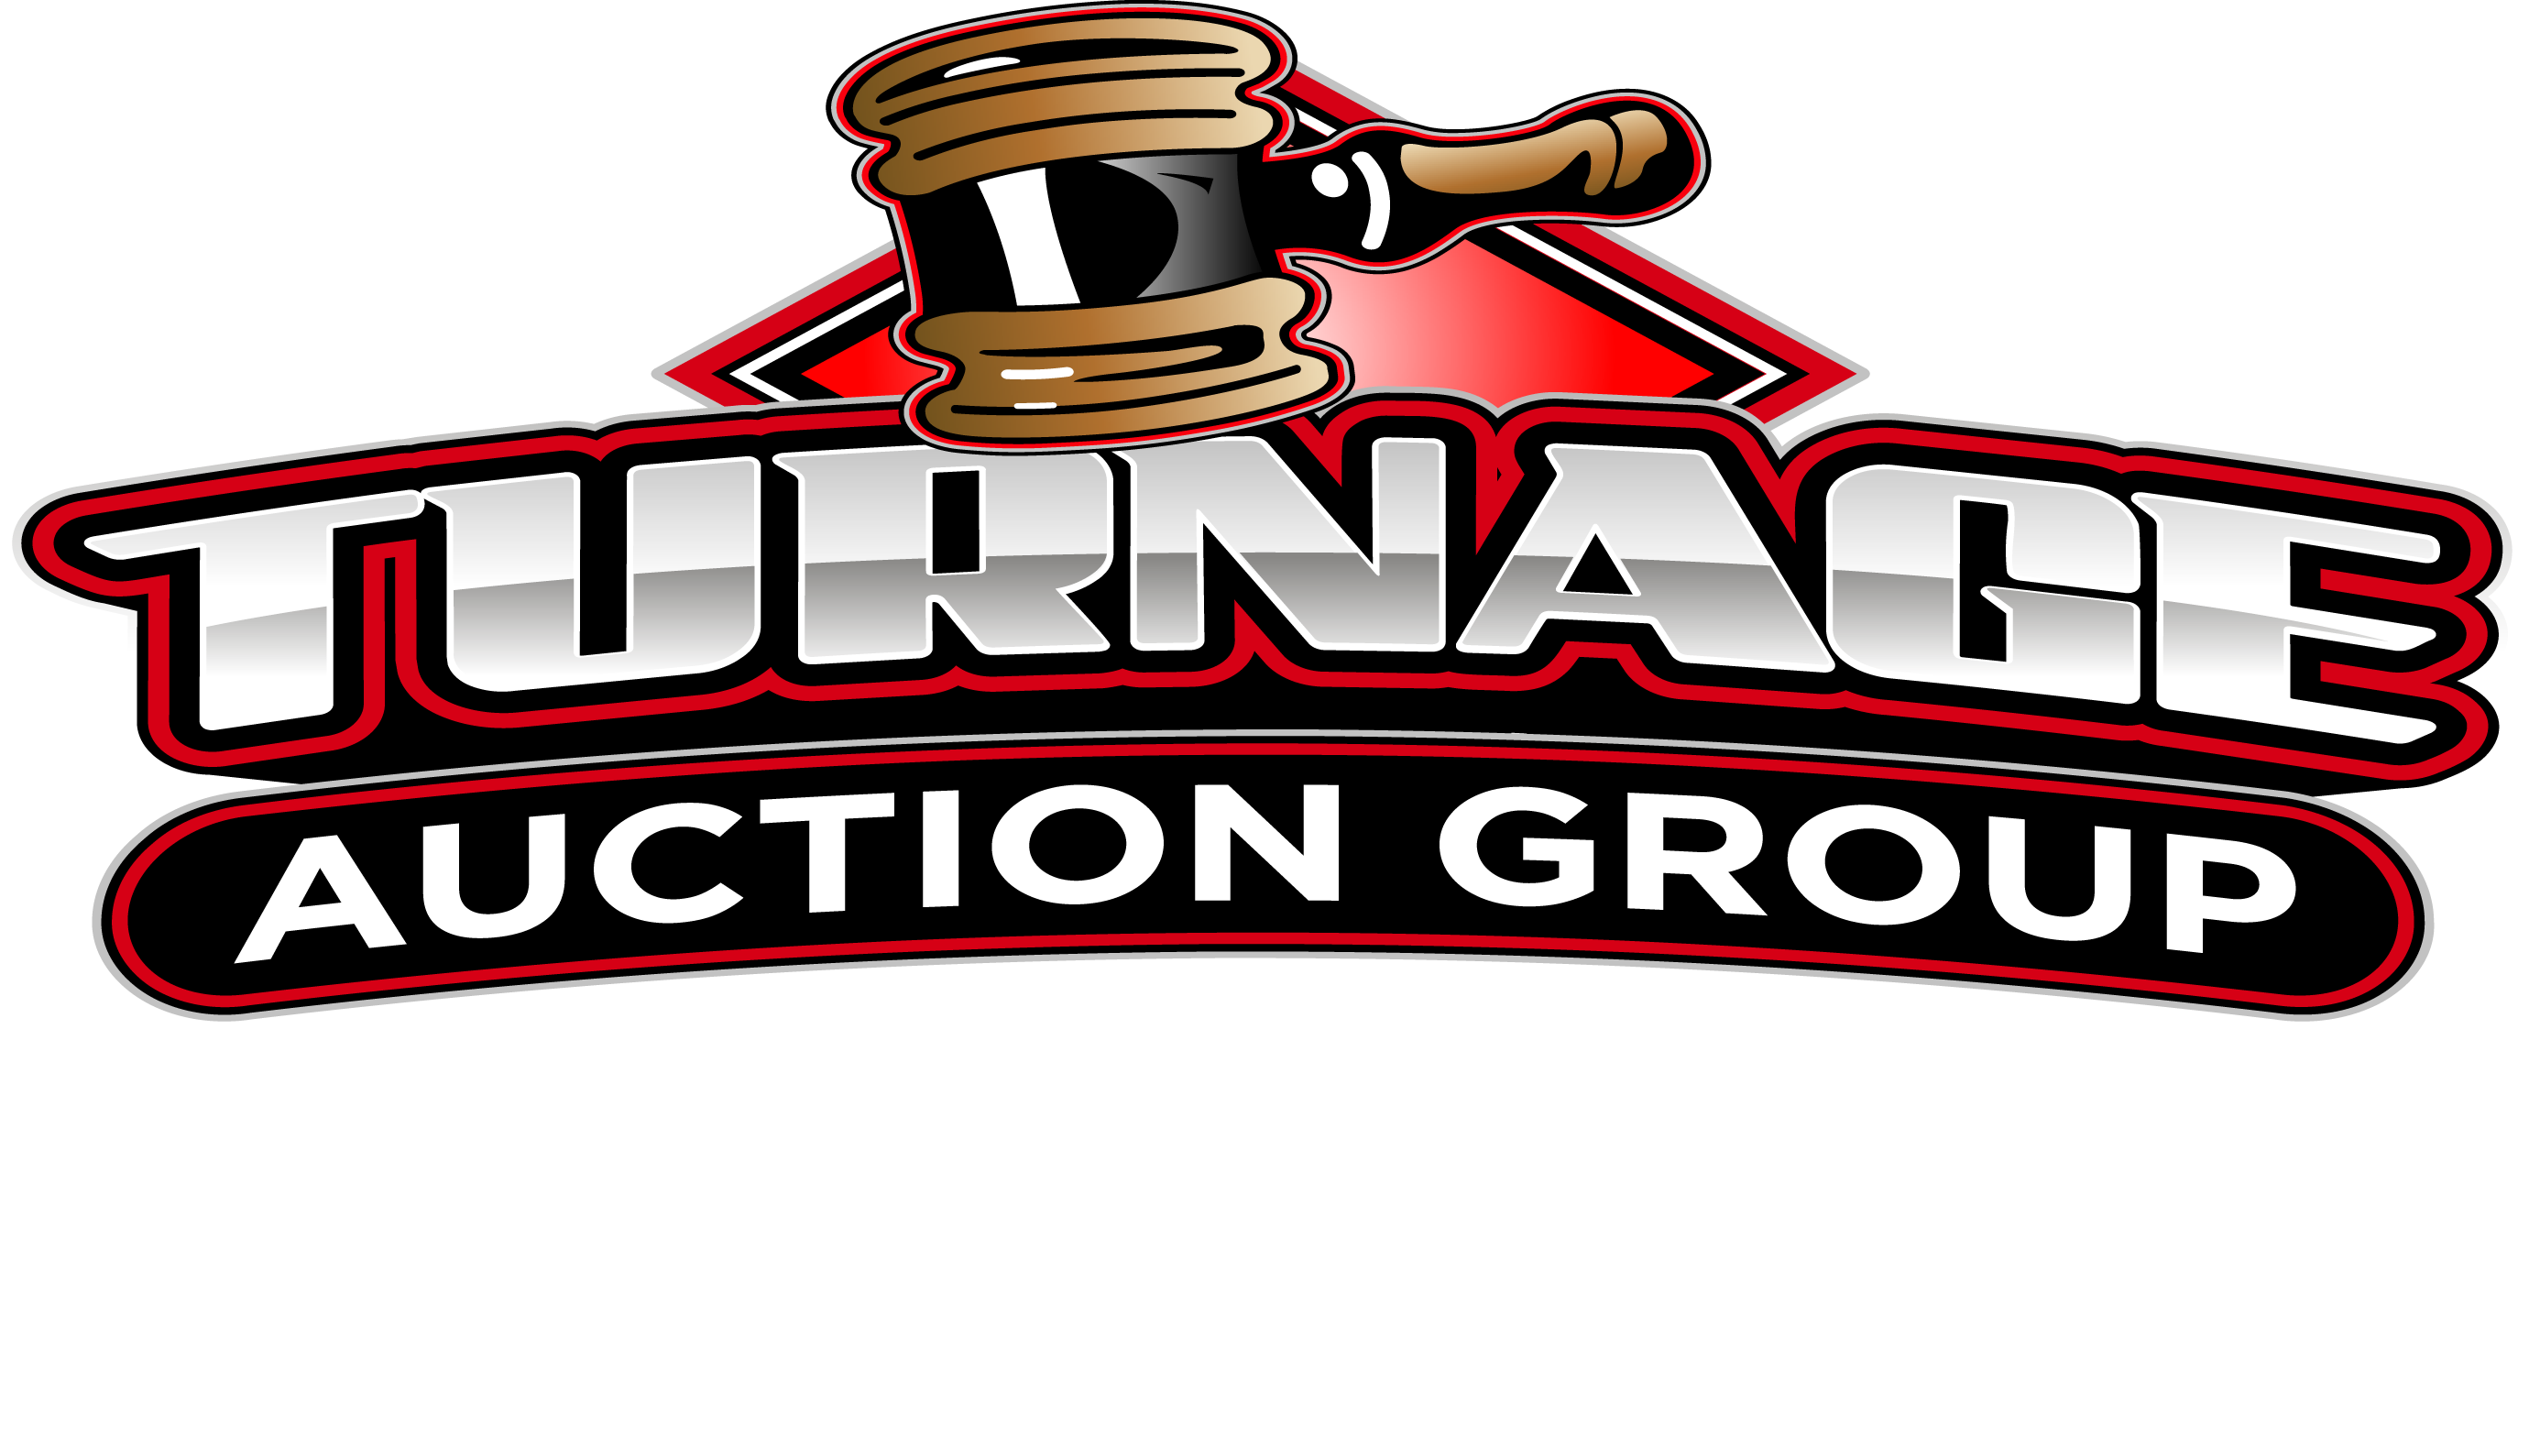 Turnage Auction Group